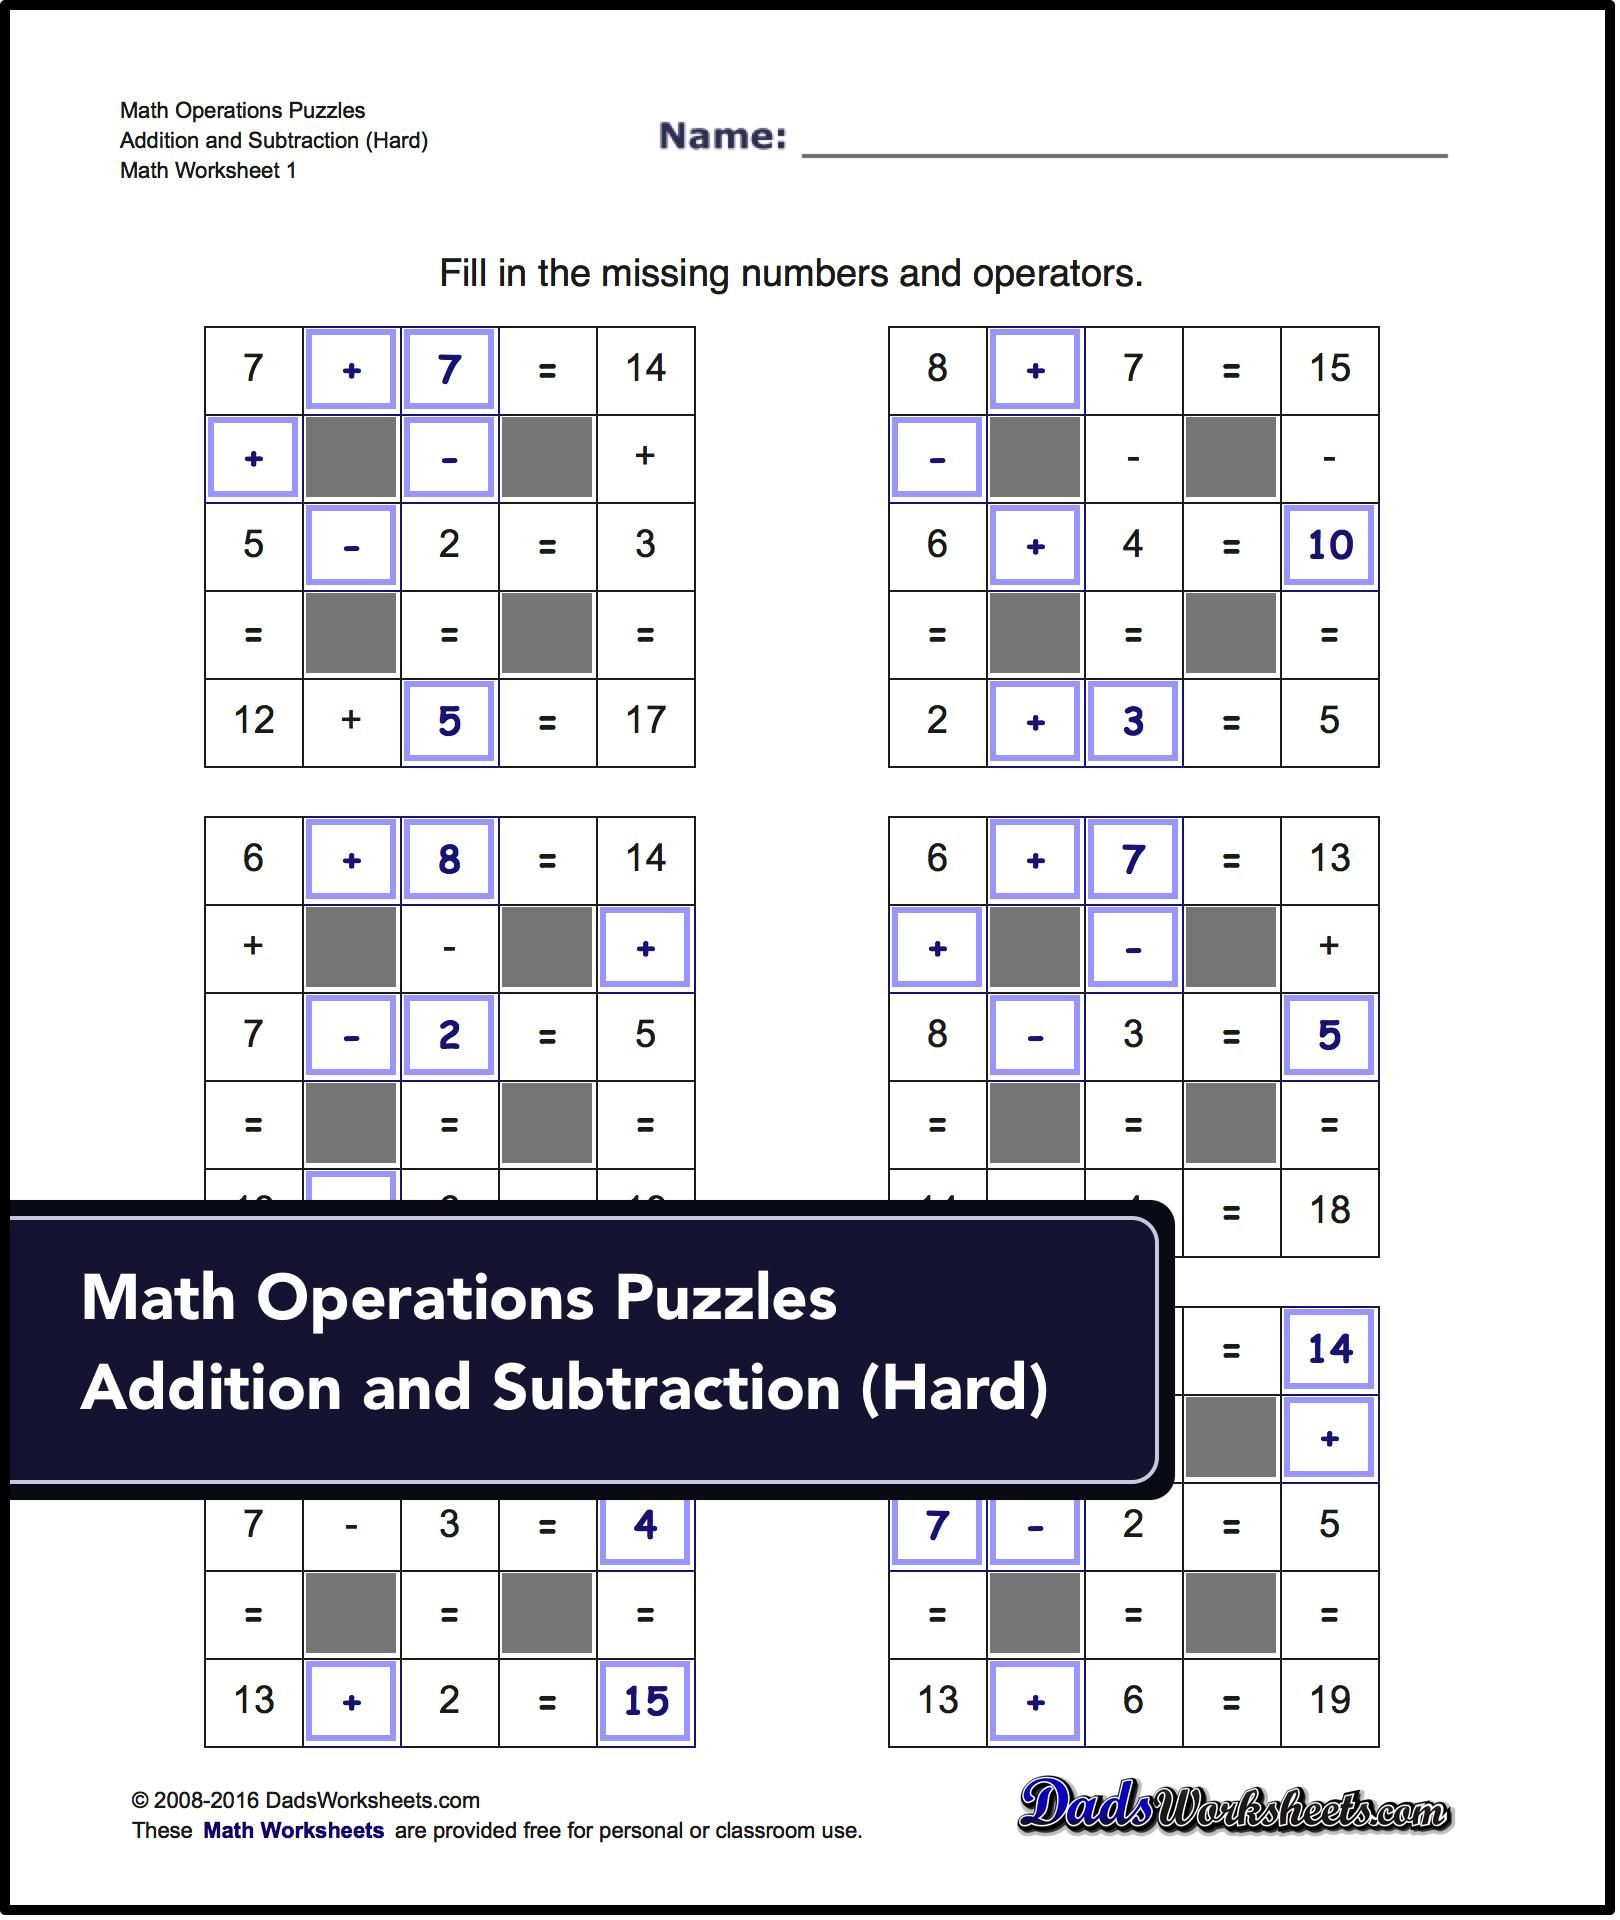 Number Grid Puzzles For Math Operations Puzzles: Addition And - Printable Grid Puzzles